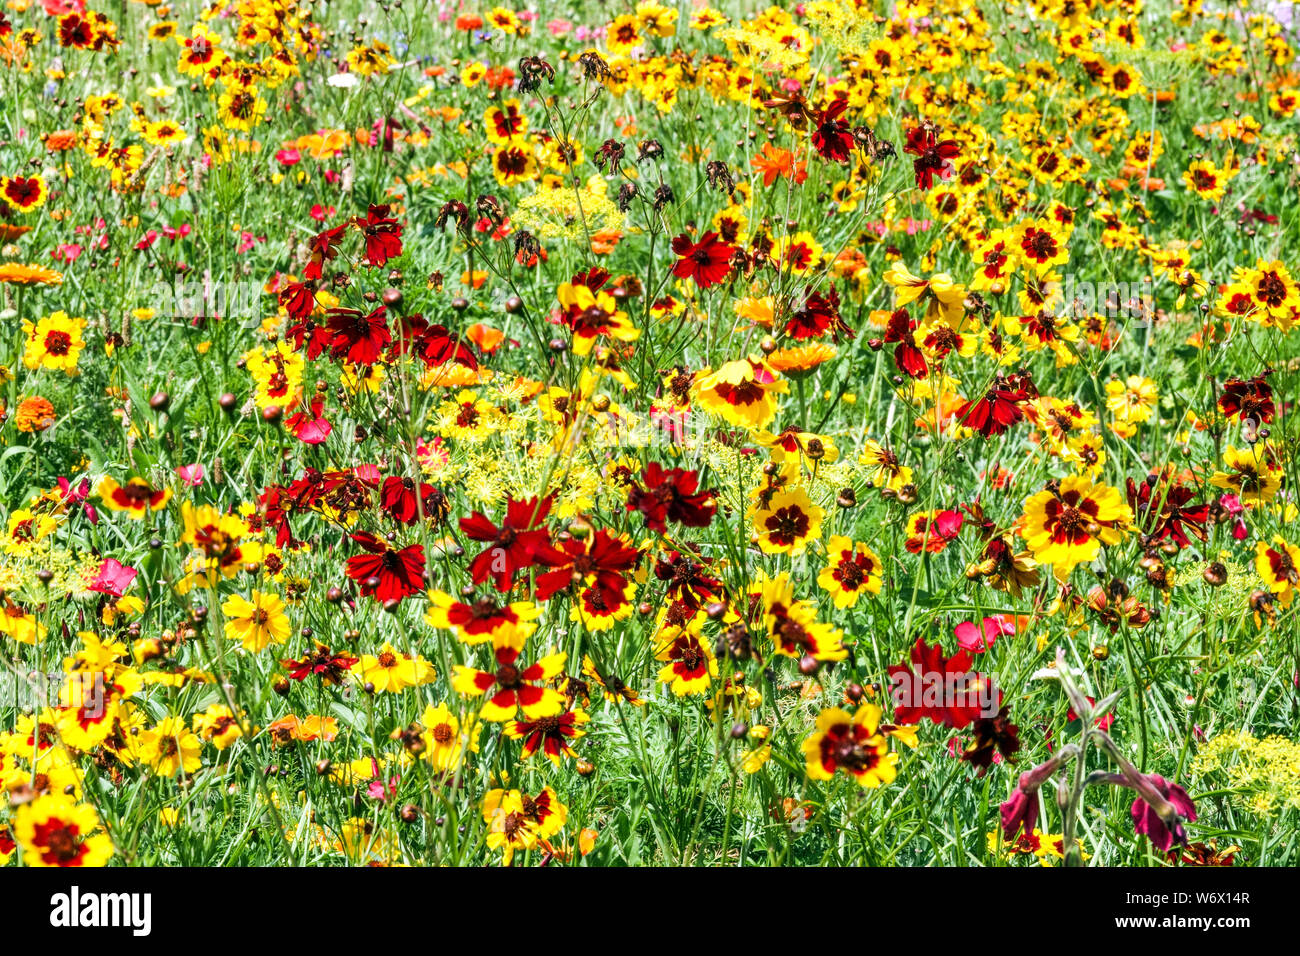 Annual plants for direct seeding into yellow-red beds and meadows, suitable for strips of mixtures of colorful flowers, Plains Coreopsis Stock Photo